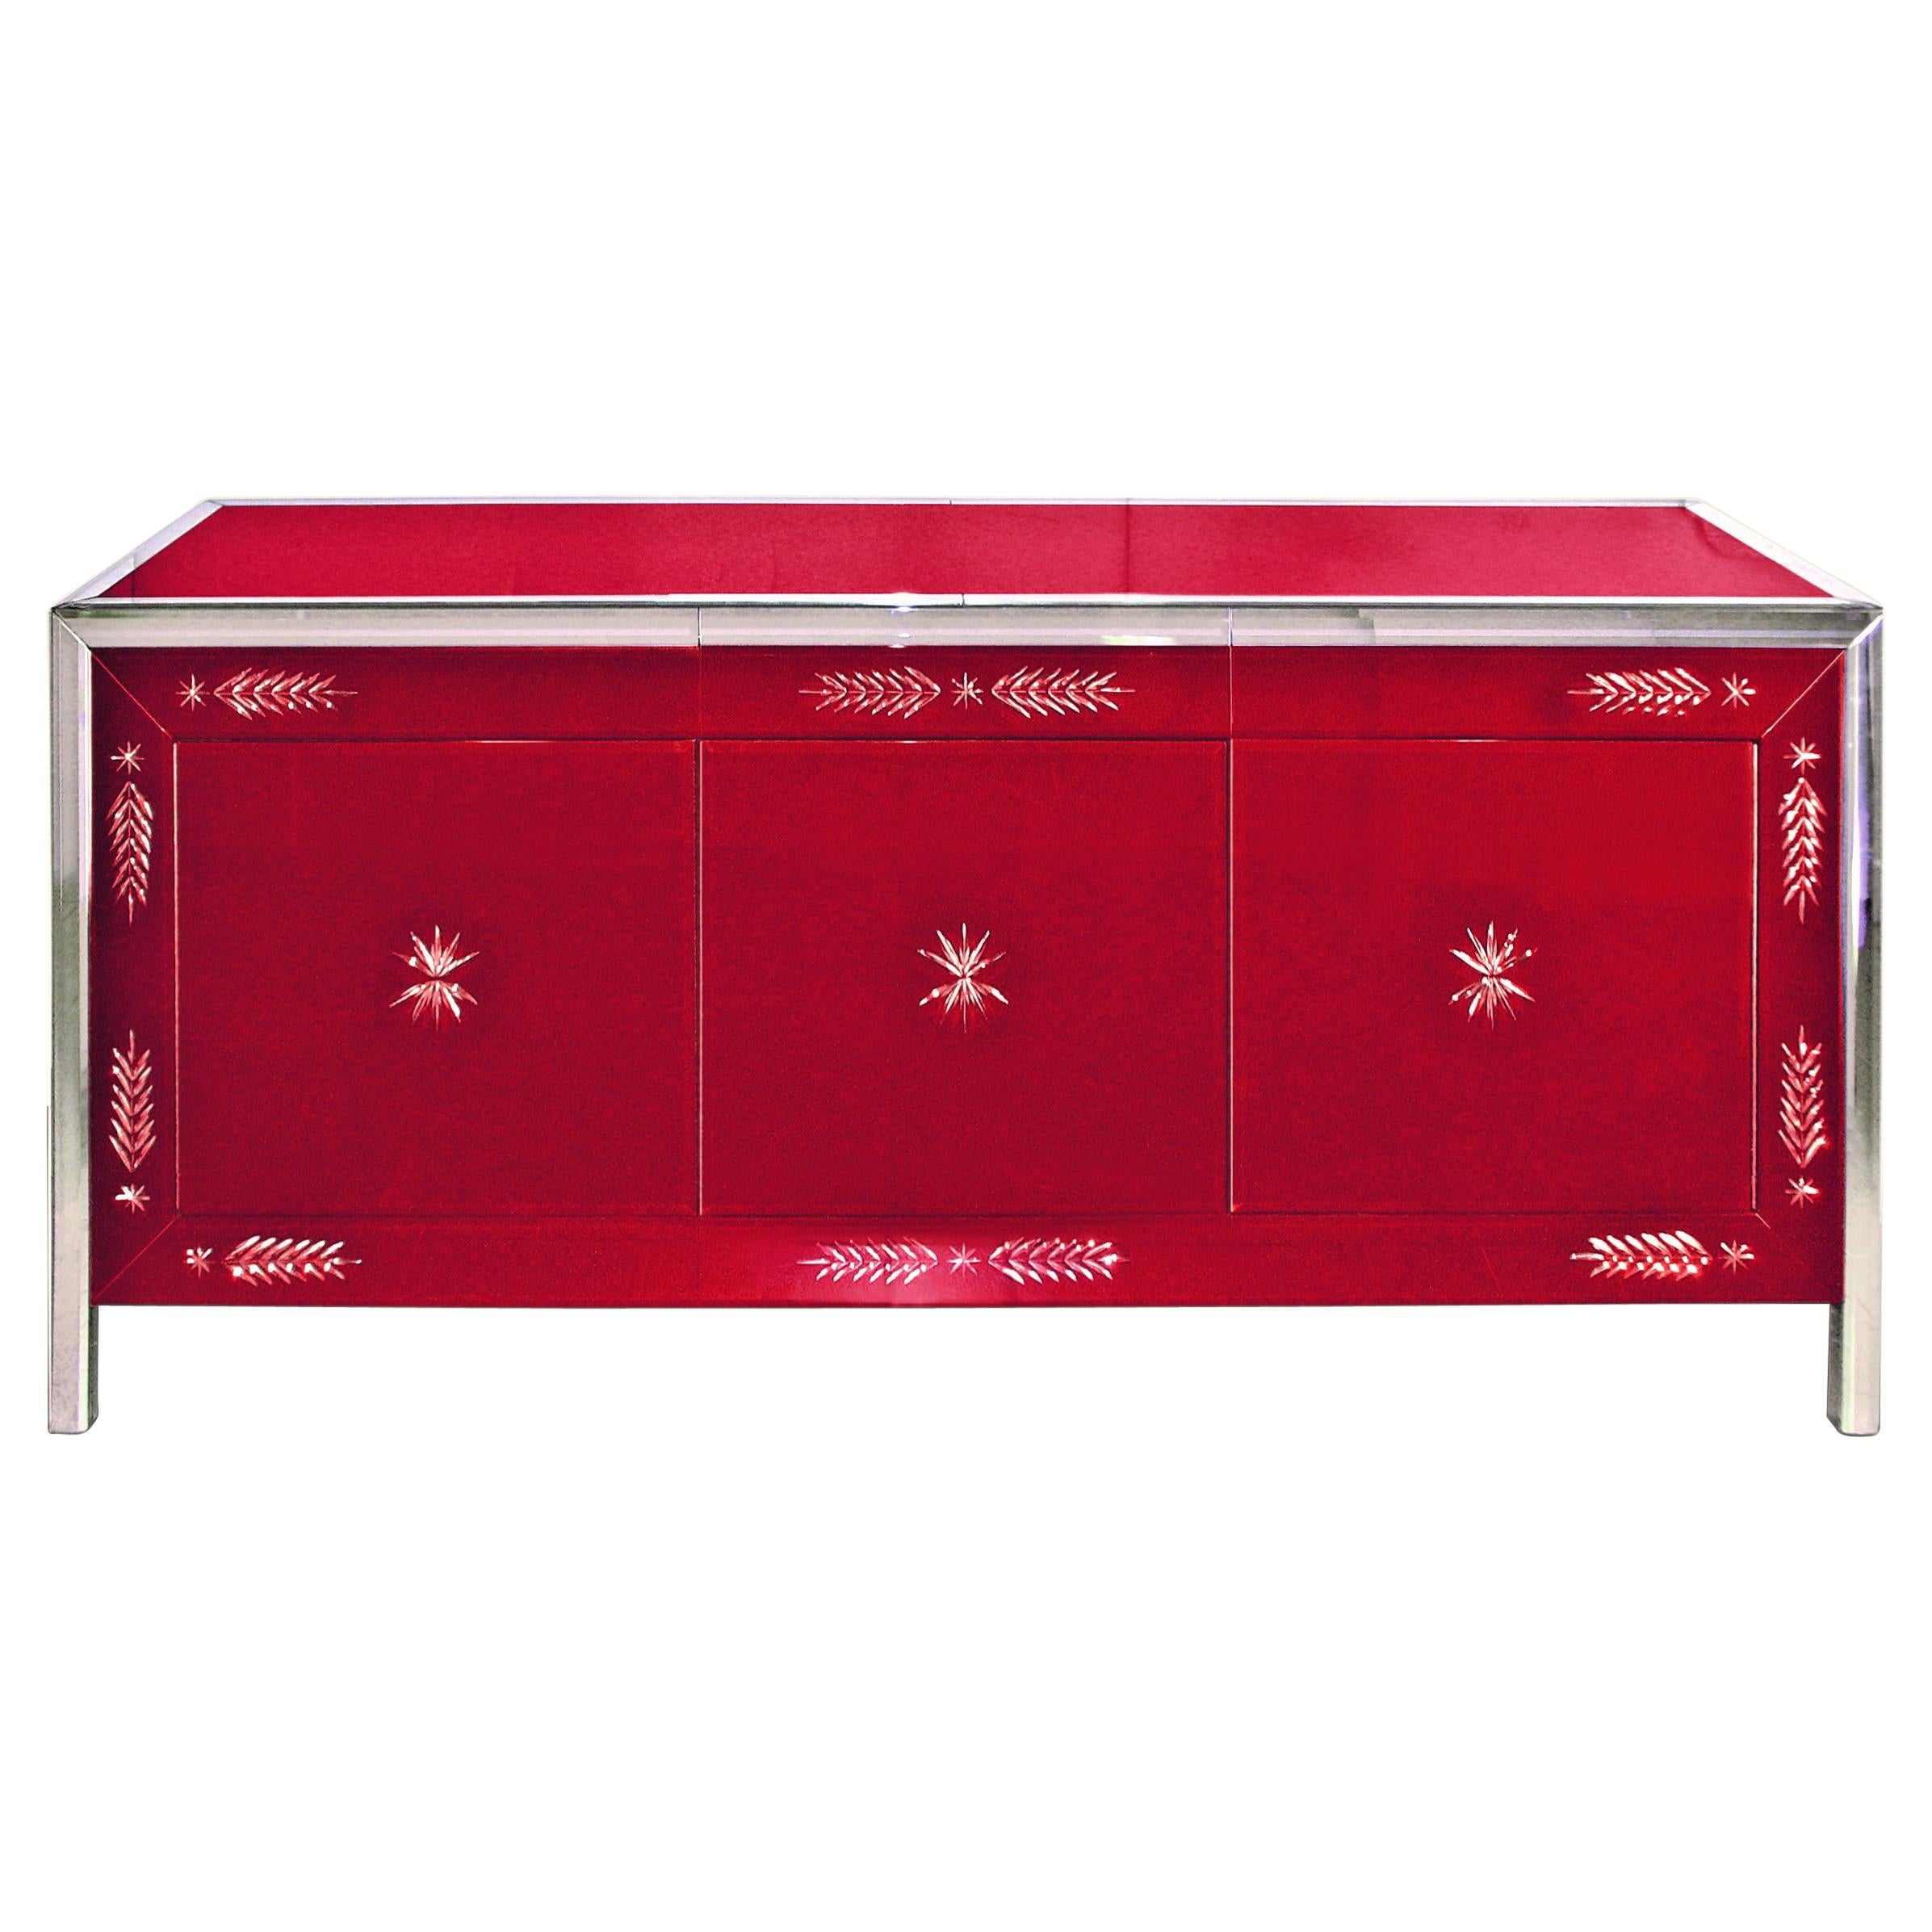 "Serenissima" Murano Glass Red Sideboard, Hand Made, Fratelli Tosi Made in Italy